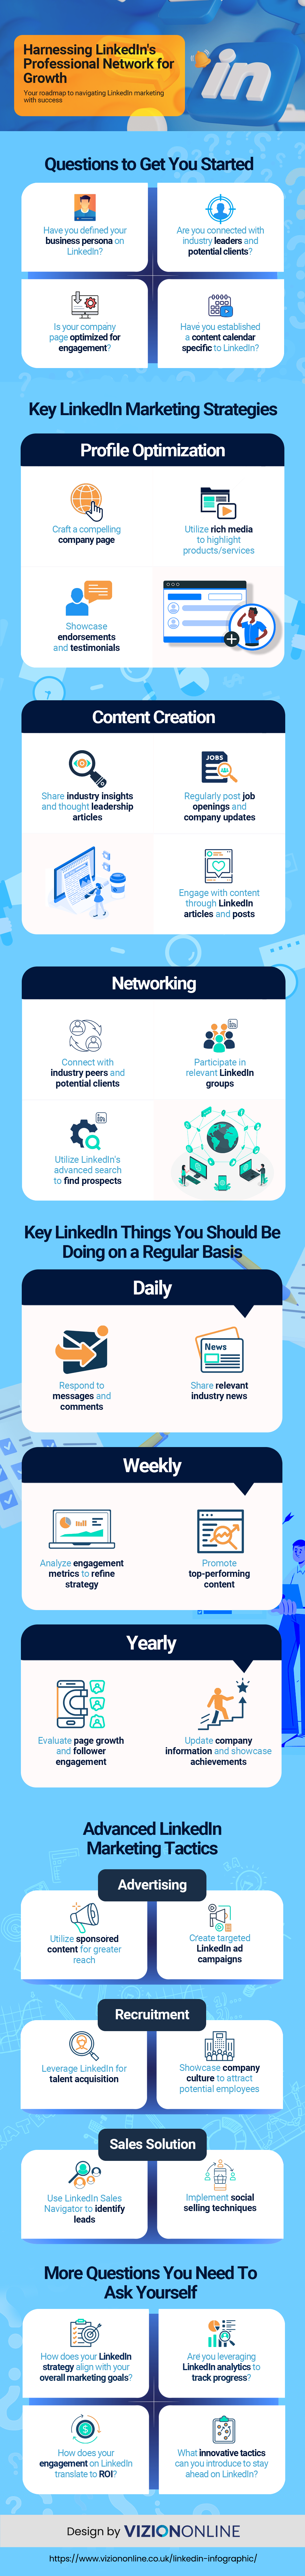 Harnessing Linkedin's Professional Network For Growth - Infographic